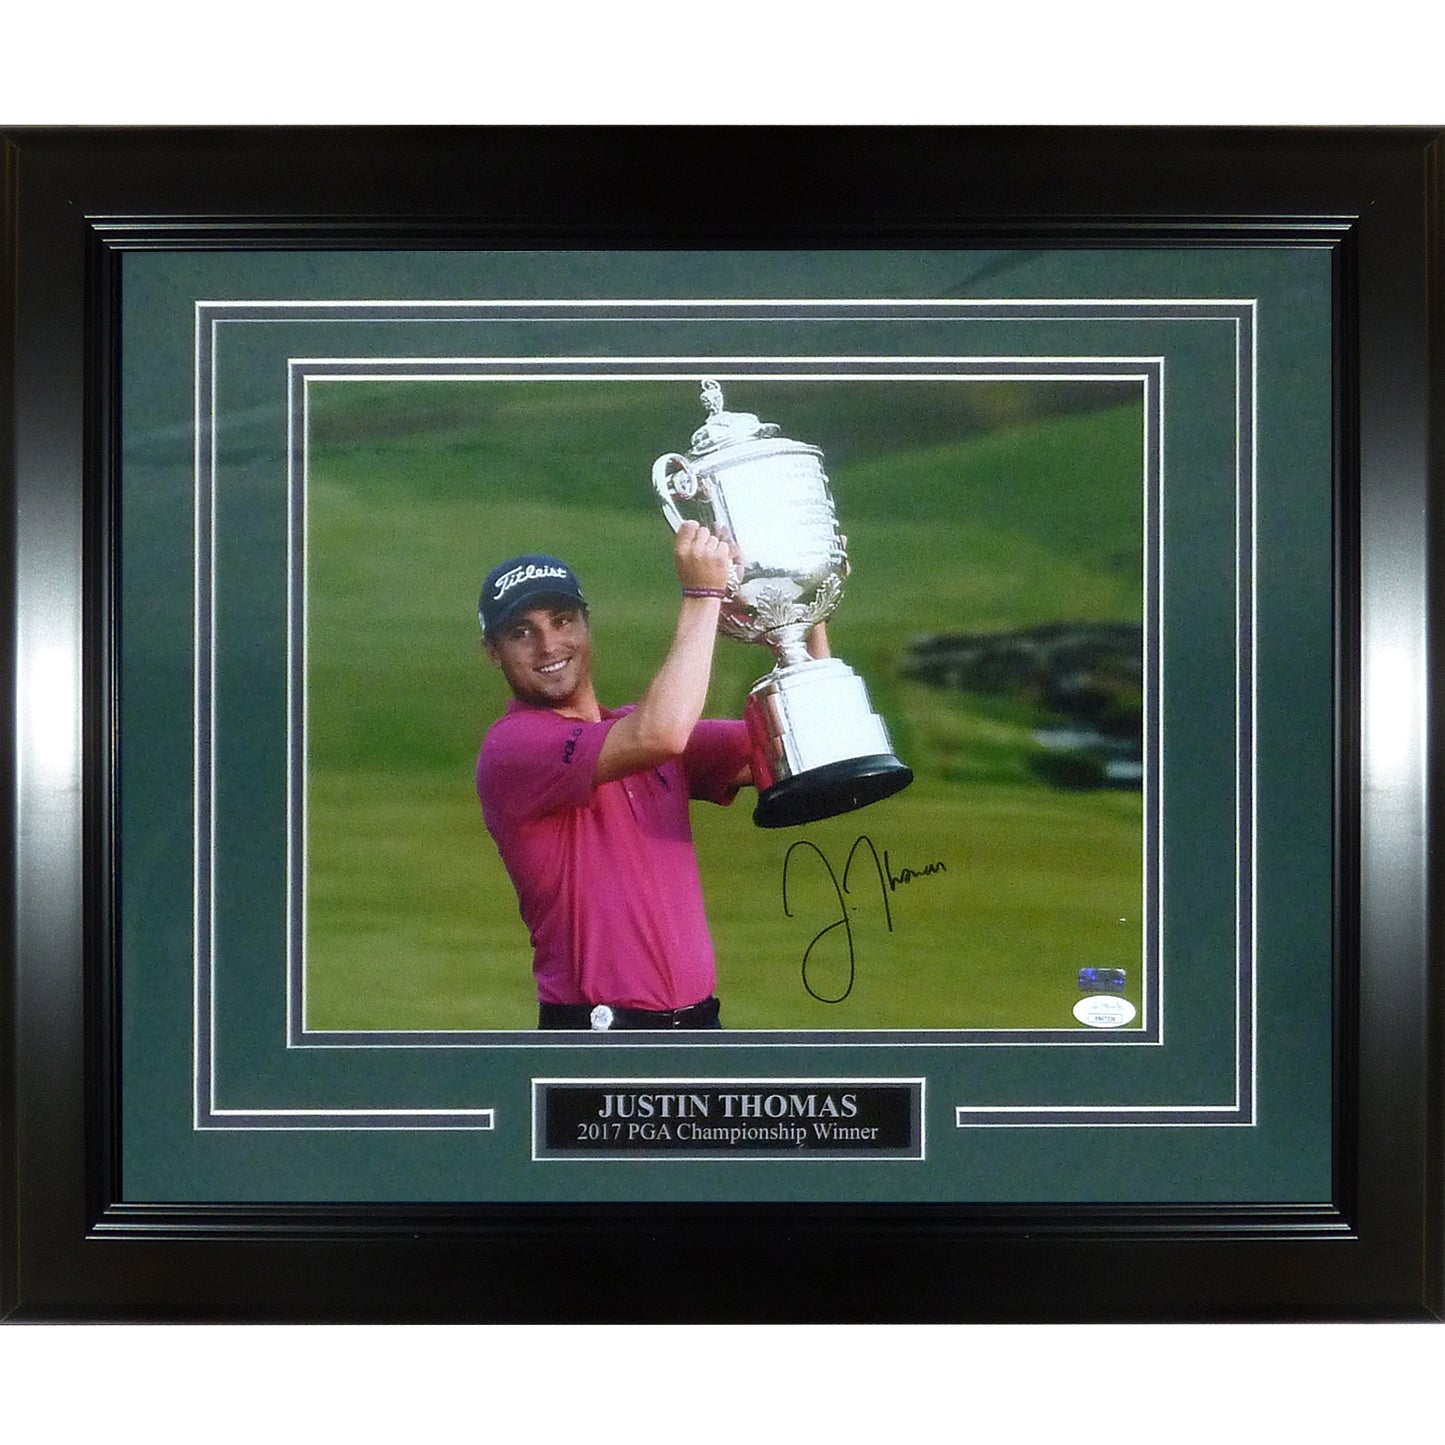 Justin Thomas Autographed Golf Deluxe Framed 11x14 Photo - JSA